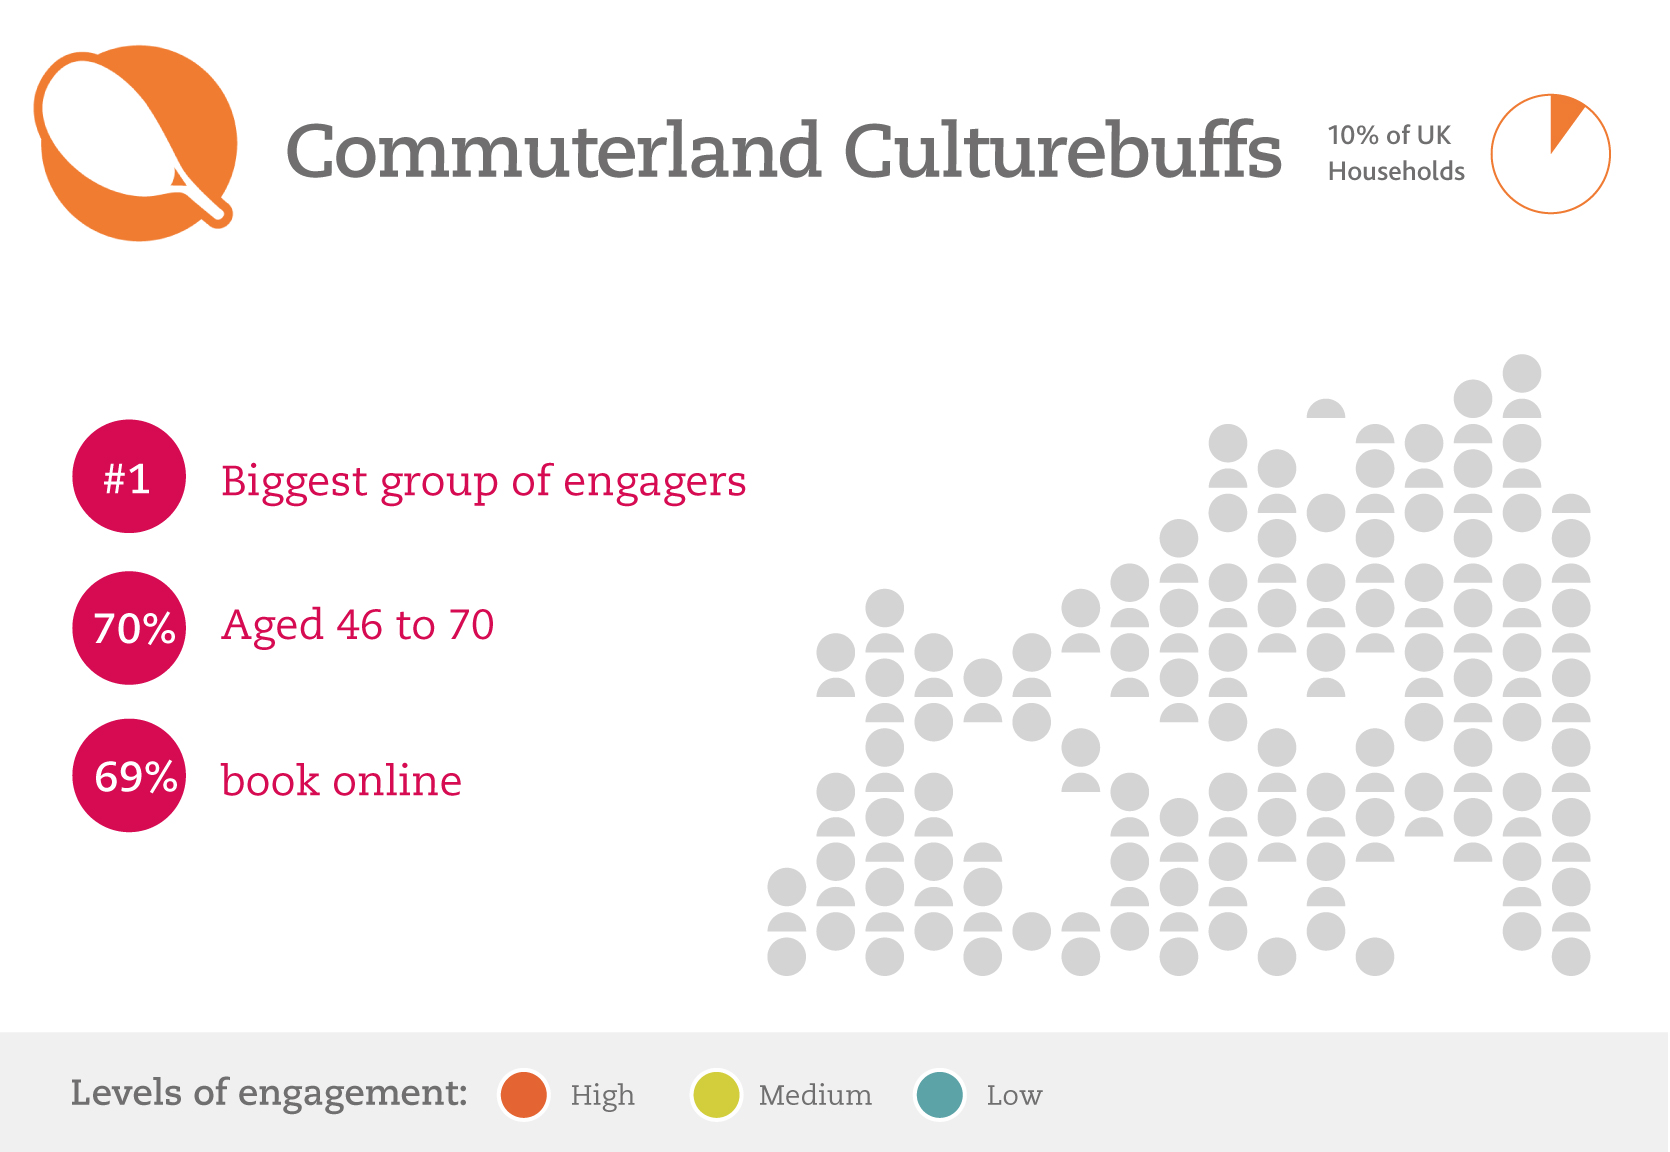 Commuterland Culturebuffs are the biggest group of engagers. They are affluent and professional consumers of culture. They’re the biggest group of browsers and bookers, both online and offline. Compared to the other two high-engaged groups, their preference for online booking over offline booking is slightly reduced. This may be because they have busy lives and tend to engage with digital for practical reasons, so do not spend large amounts of time browsing.